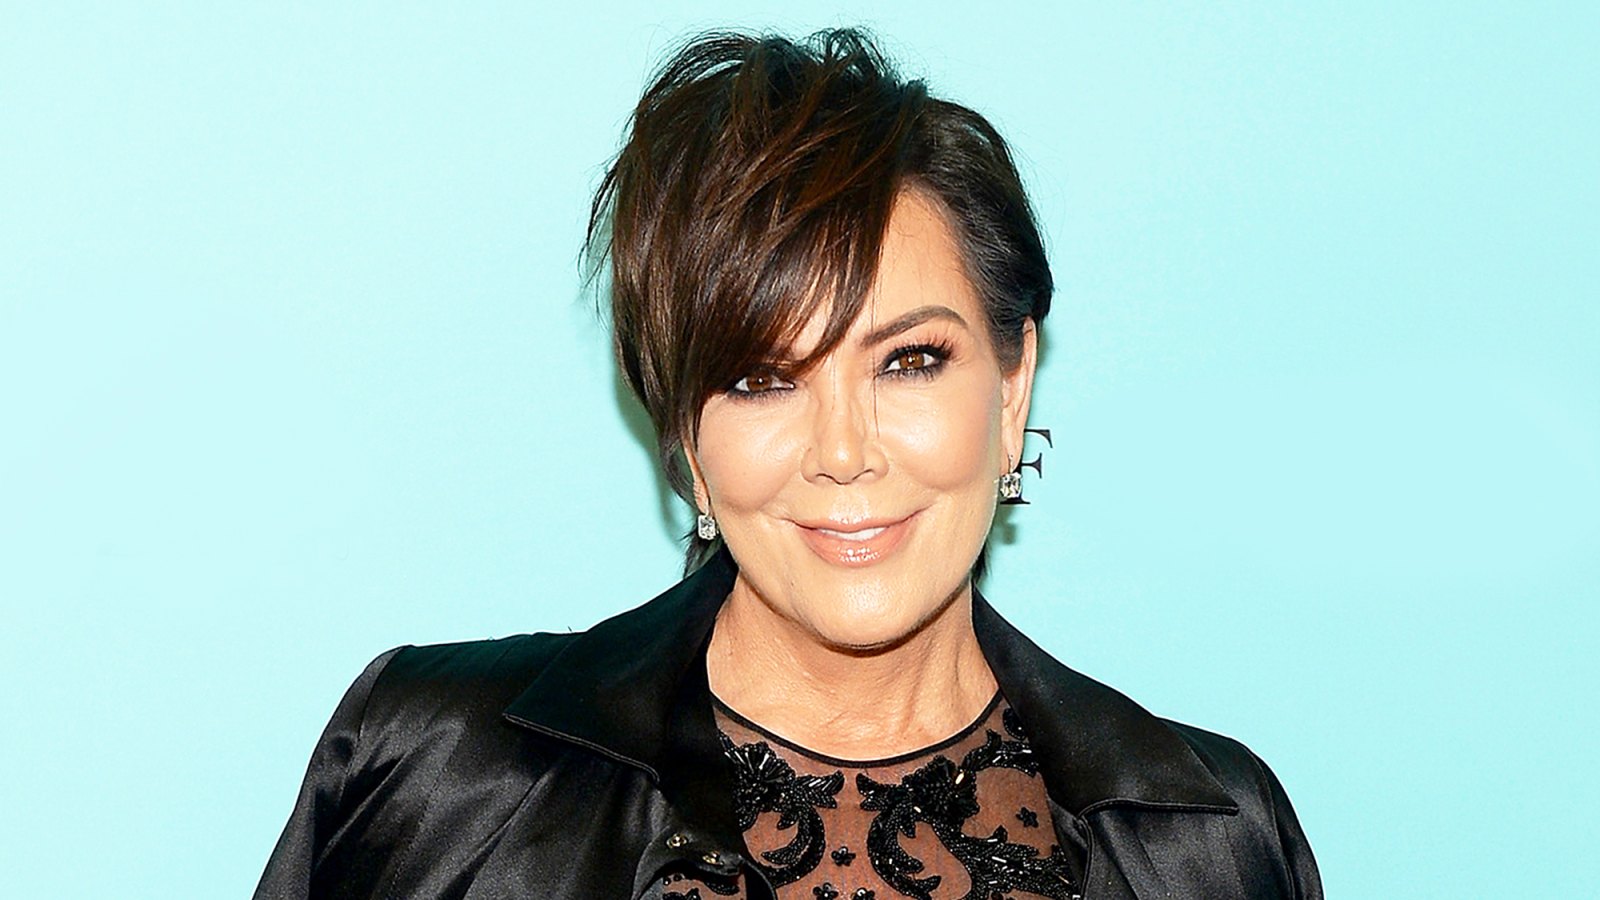 Kris Jenner attends Harper's BAZAAR 150th Anniversary presented with Tiffany & Co at The Rainbow Room in 2017.